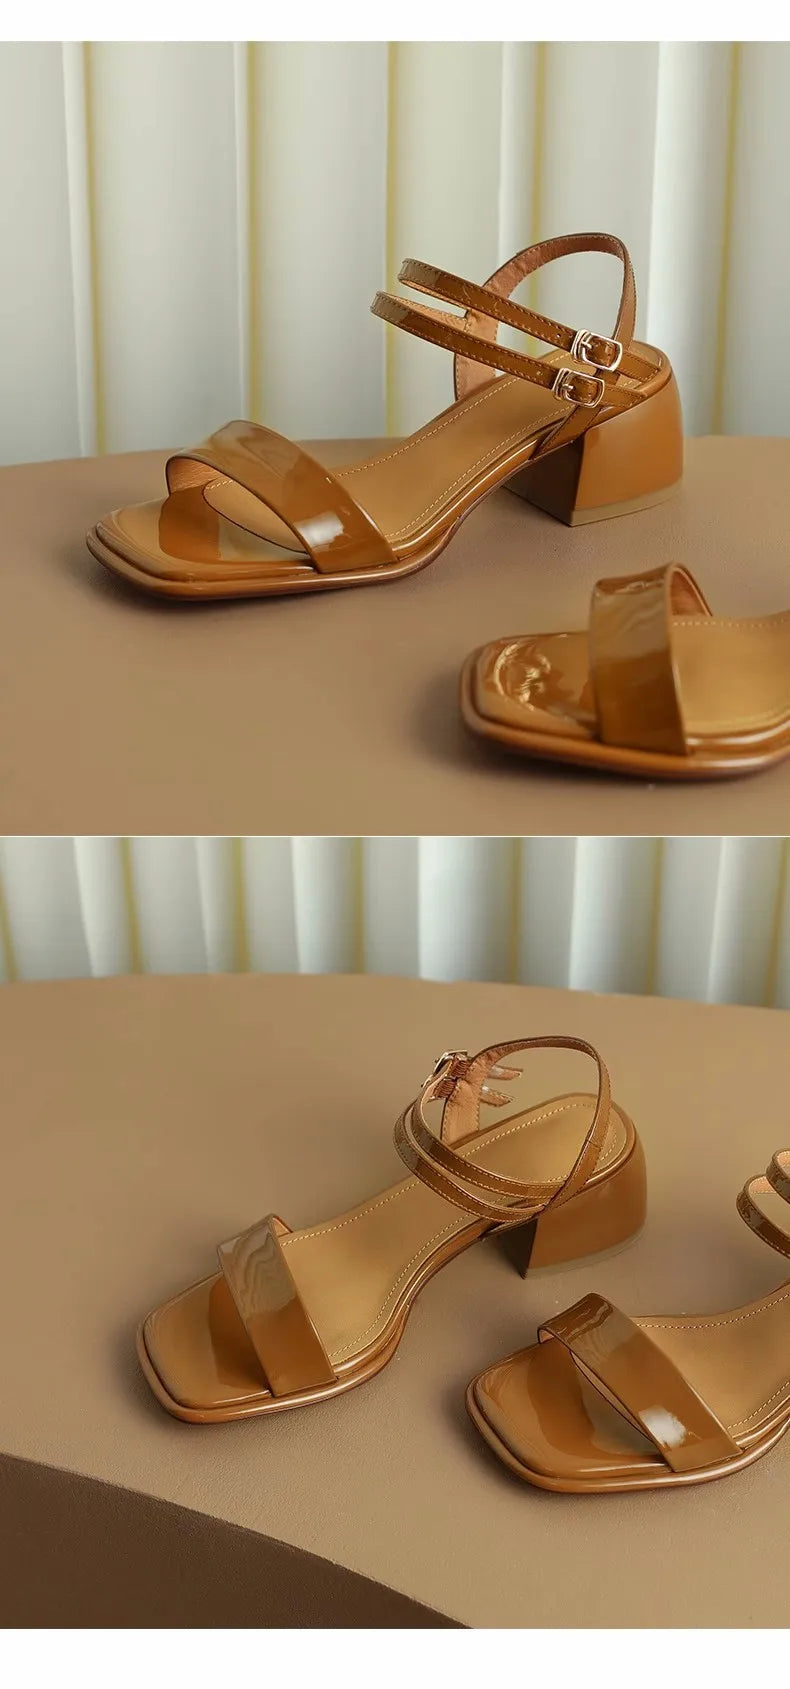 Women Fashion Sandals High Quality Ladies Shoes Double Buckle Mid Heel Shoes - WSD50224